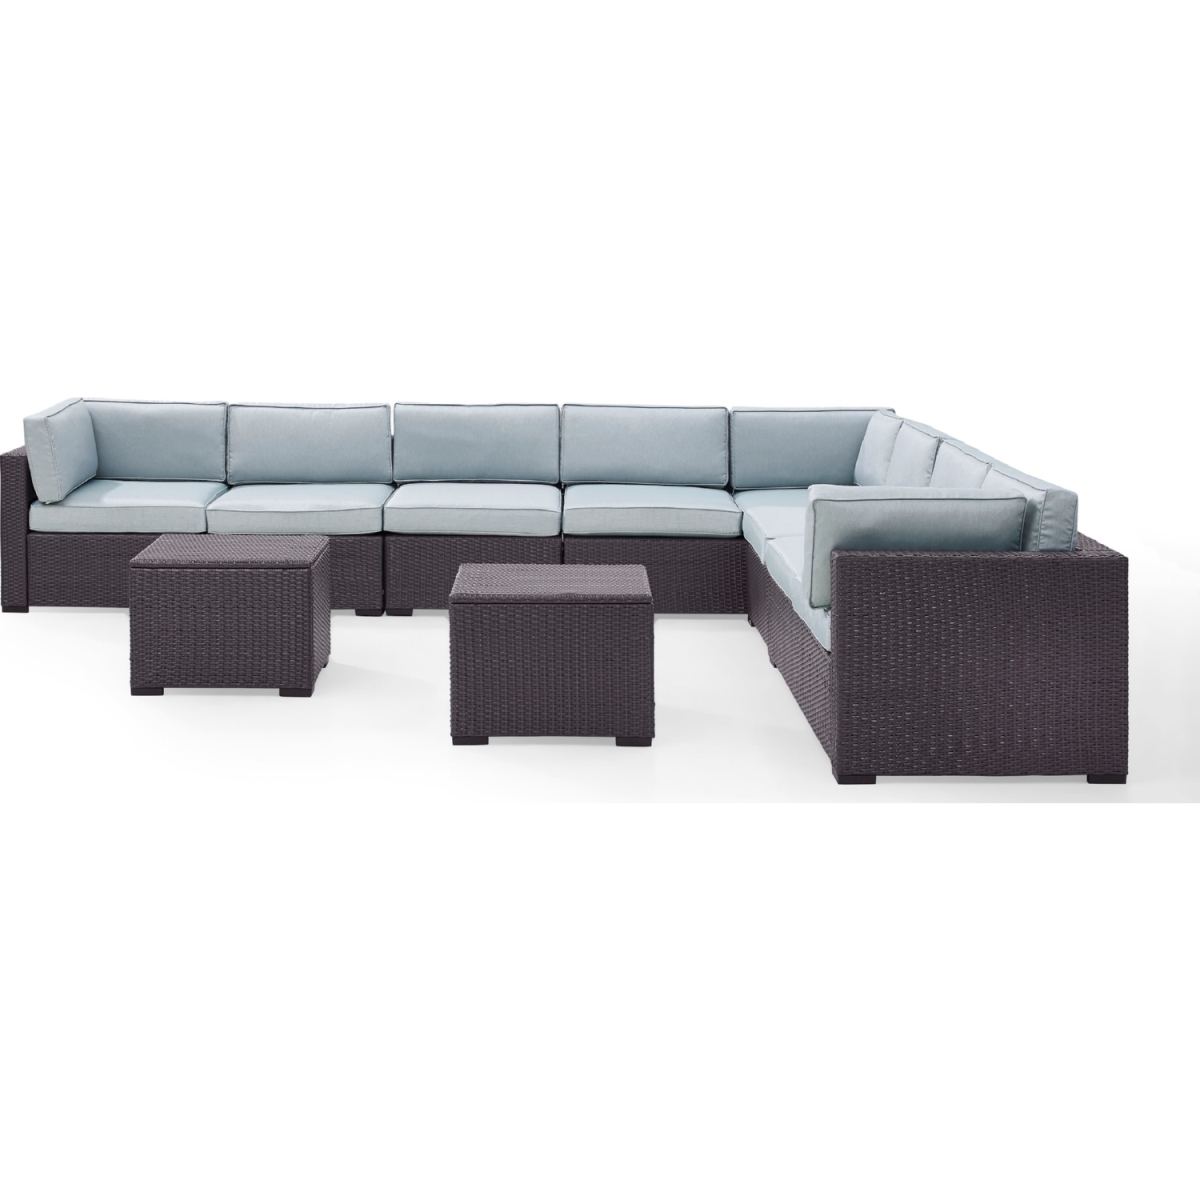 Ko70109br-mi Biscayne 8 Person Outdoor Wicker Seating Set, Mist - Three Loveseats, Two Armless Chair, Two Coffee Table